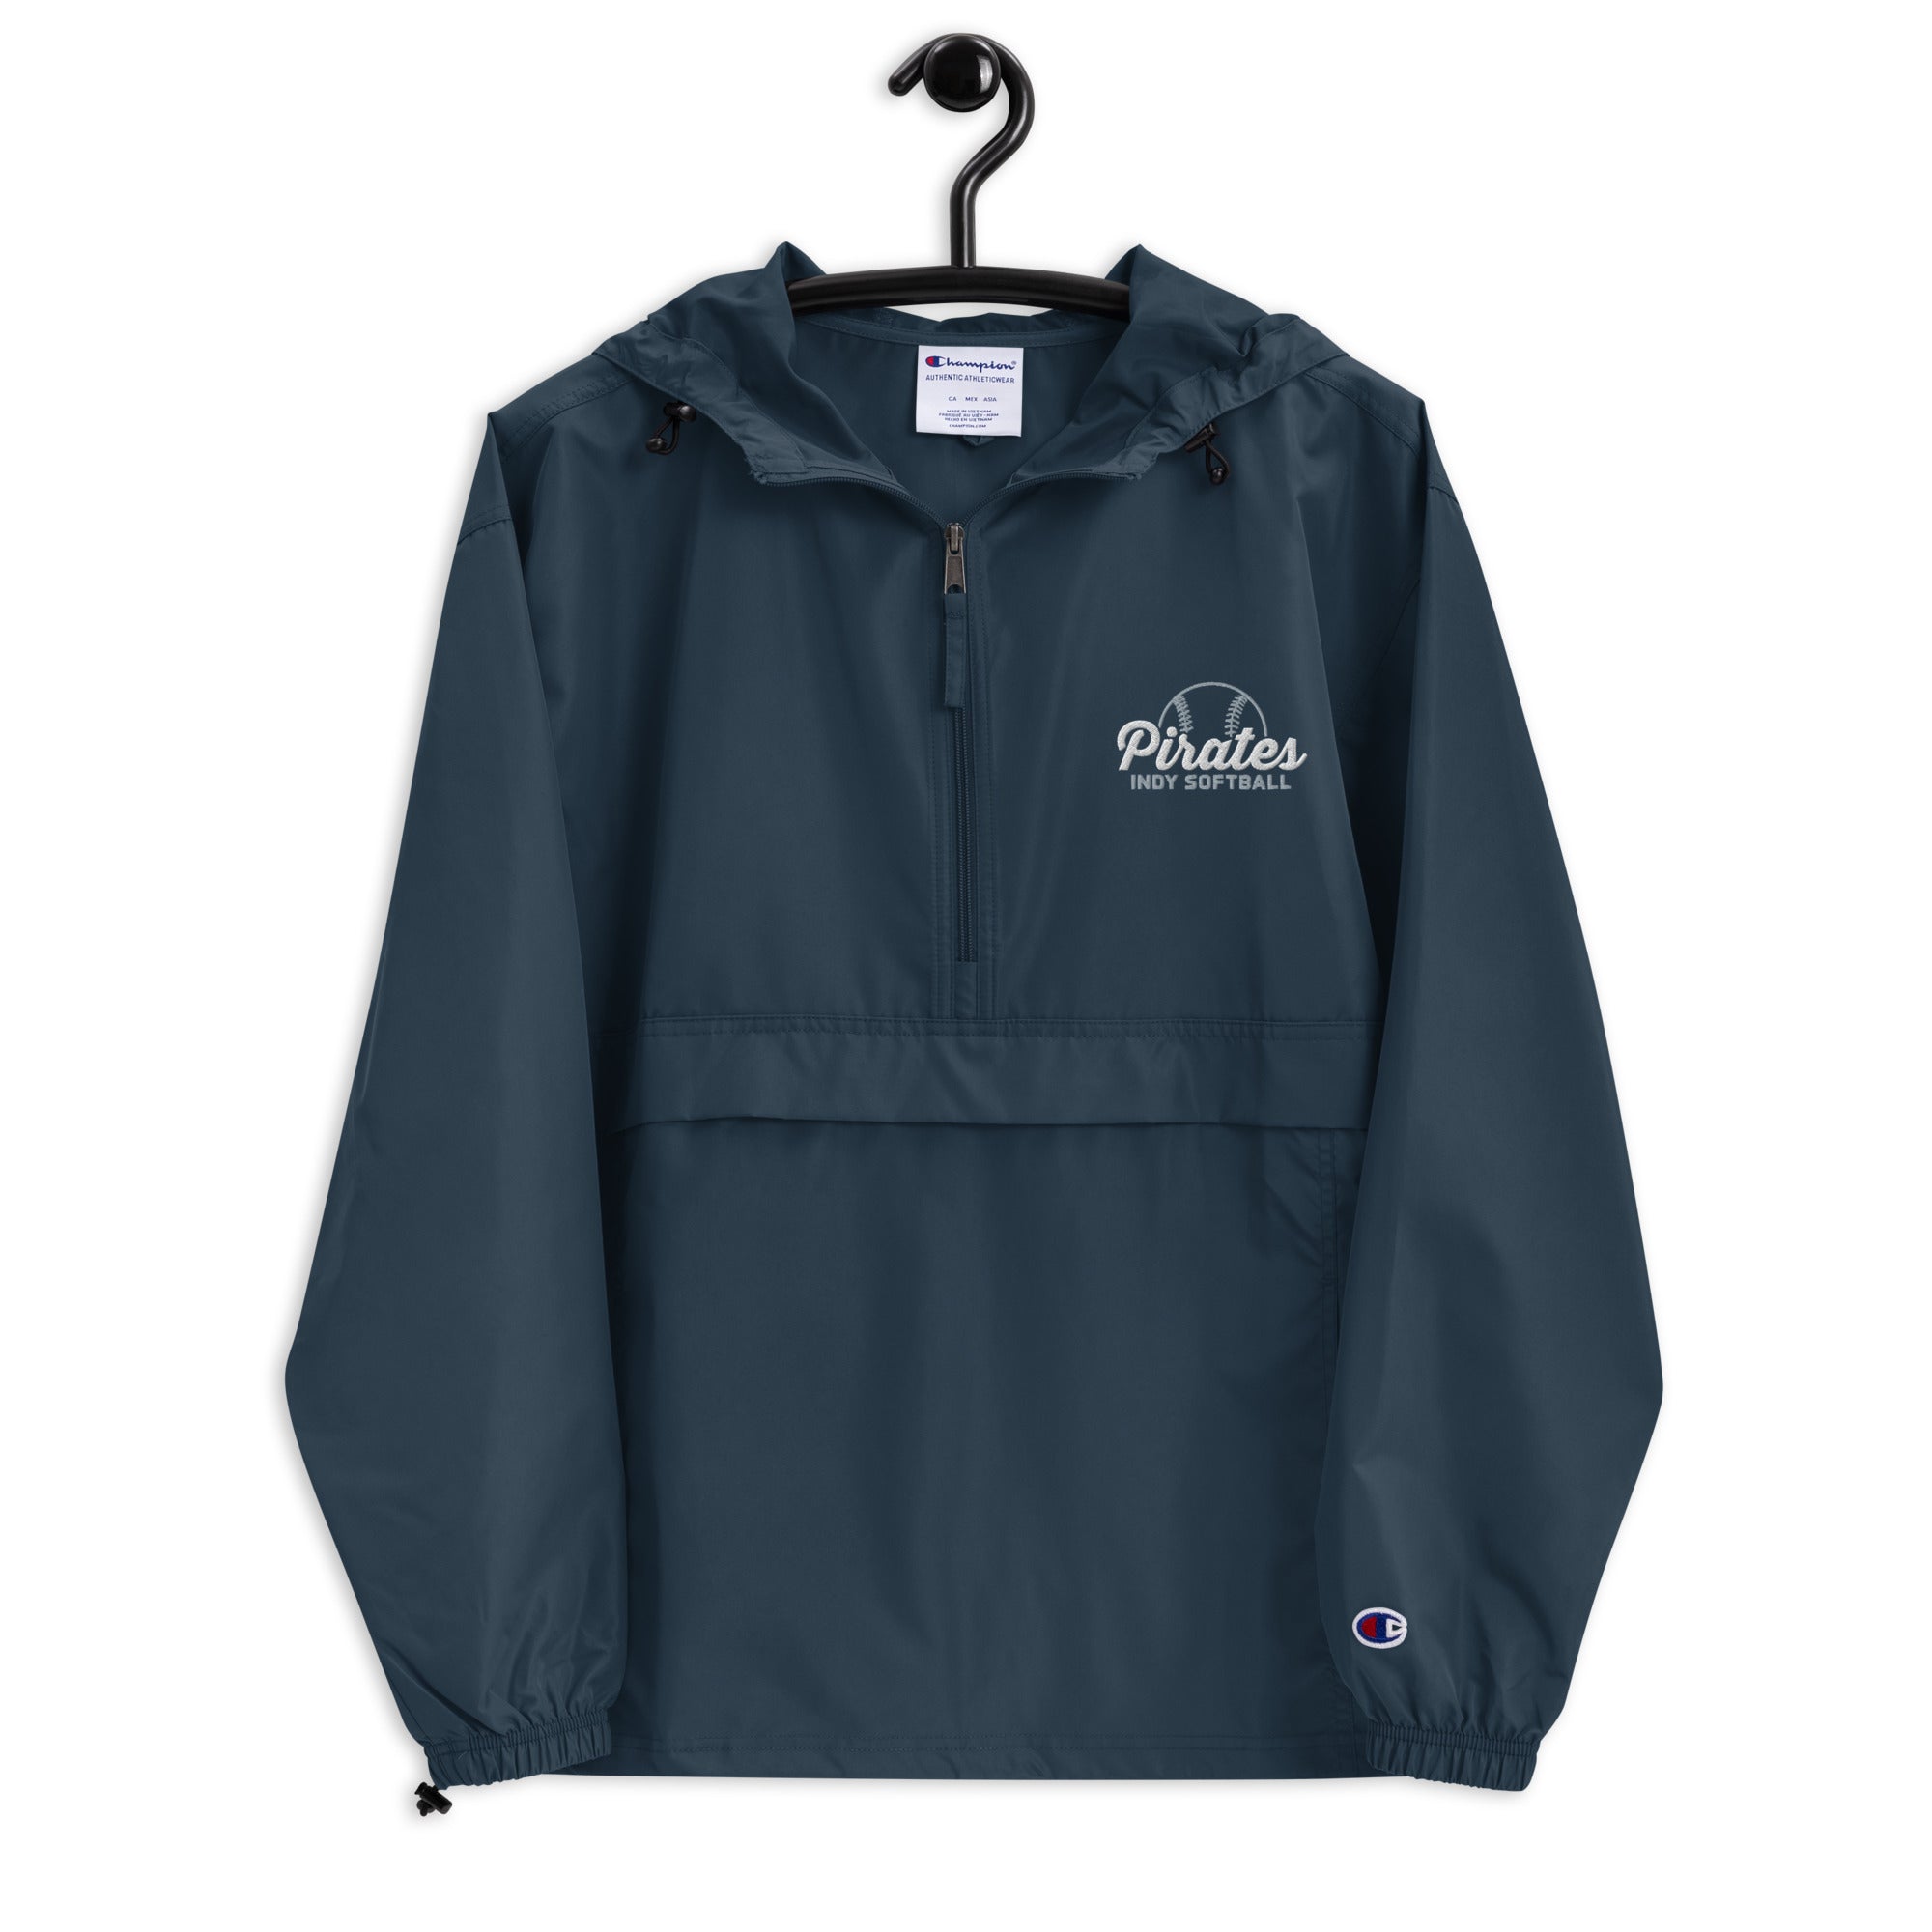 Indy Softball Embroidered Champion Packable Jacket - Blue Chip